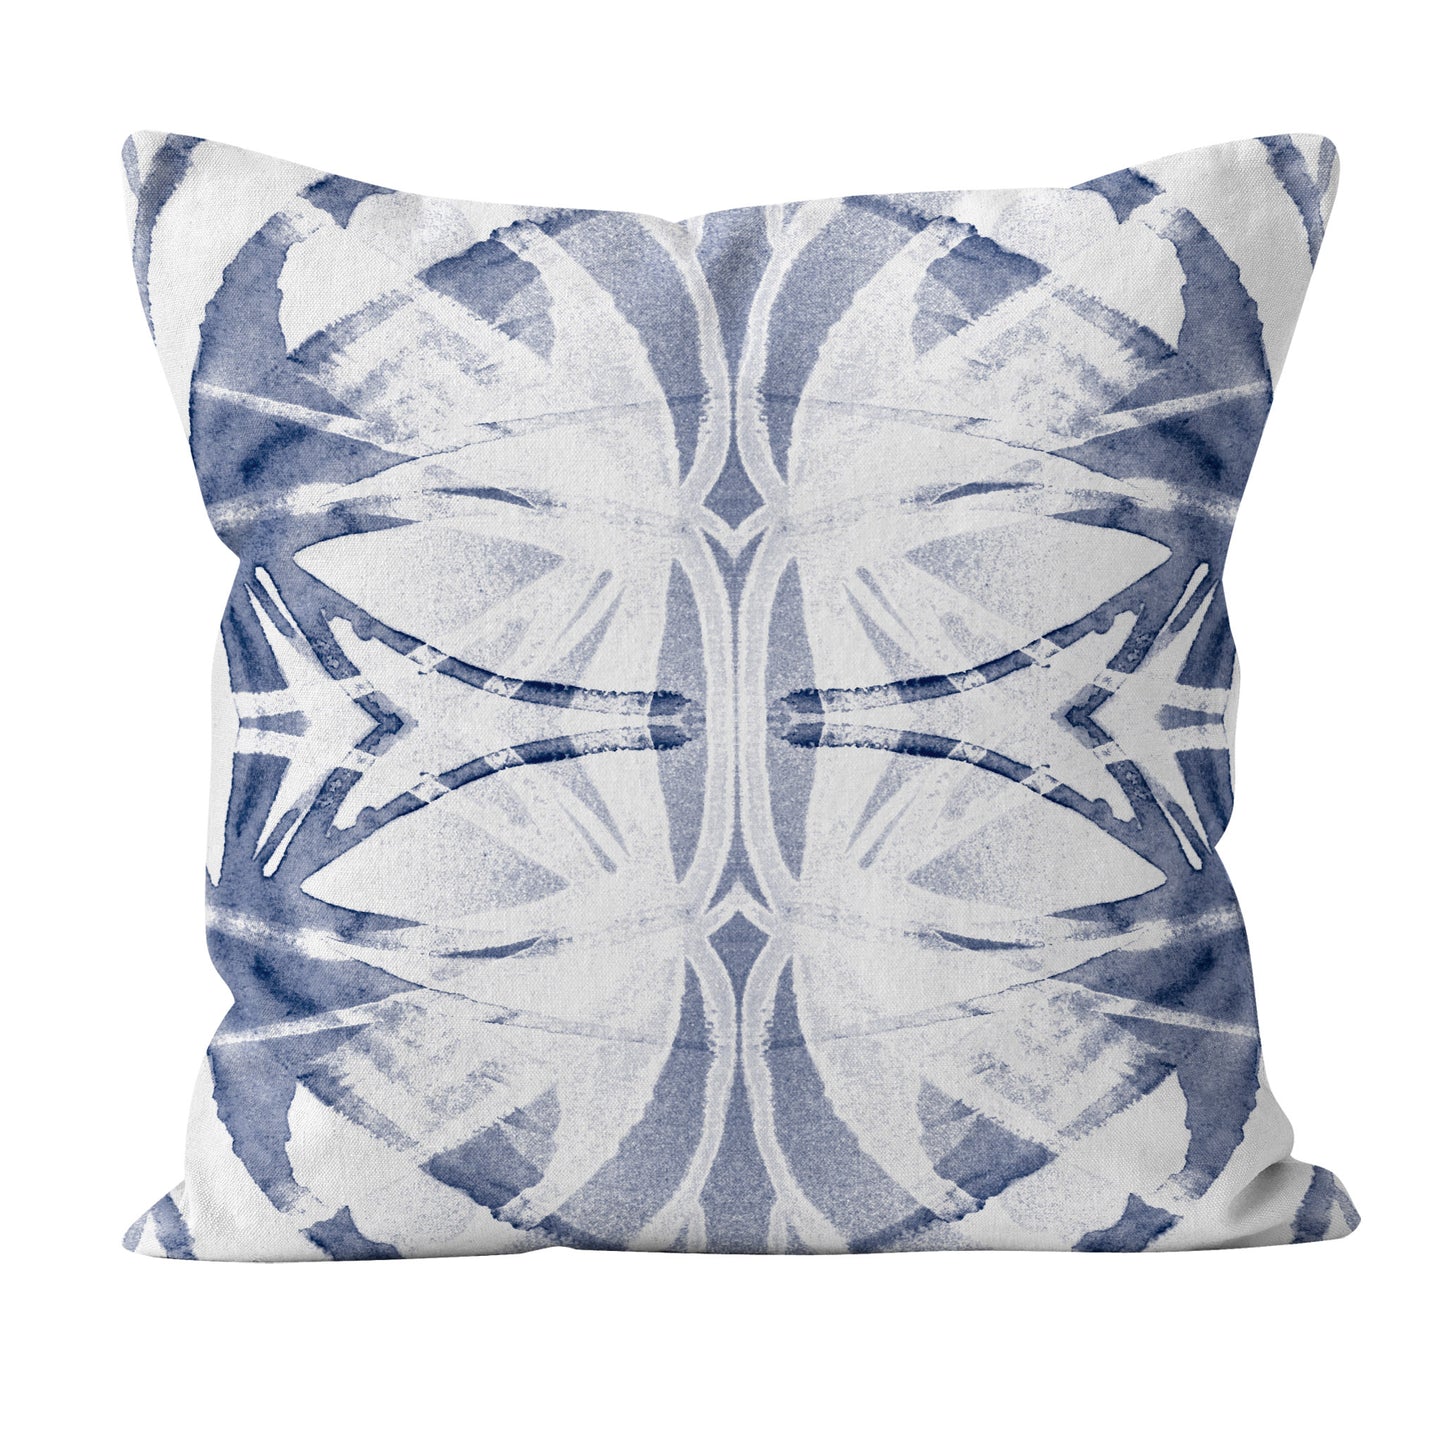 Throw pillow featuring an abstract blue watercolor pattern